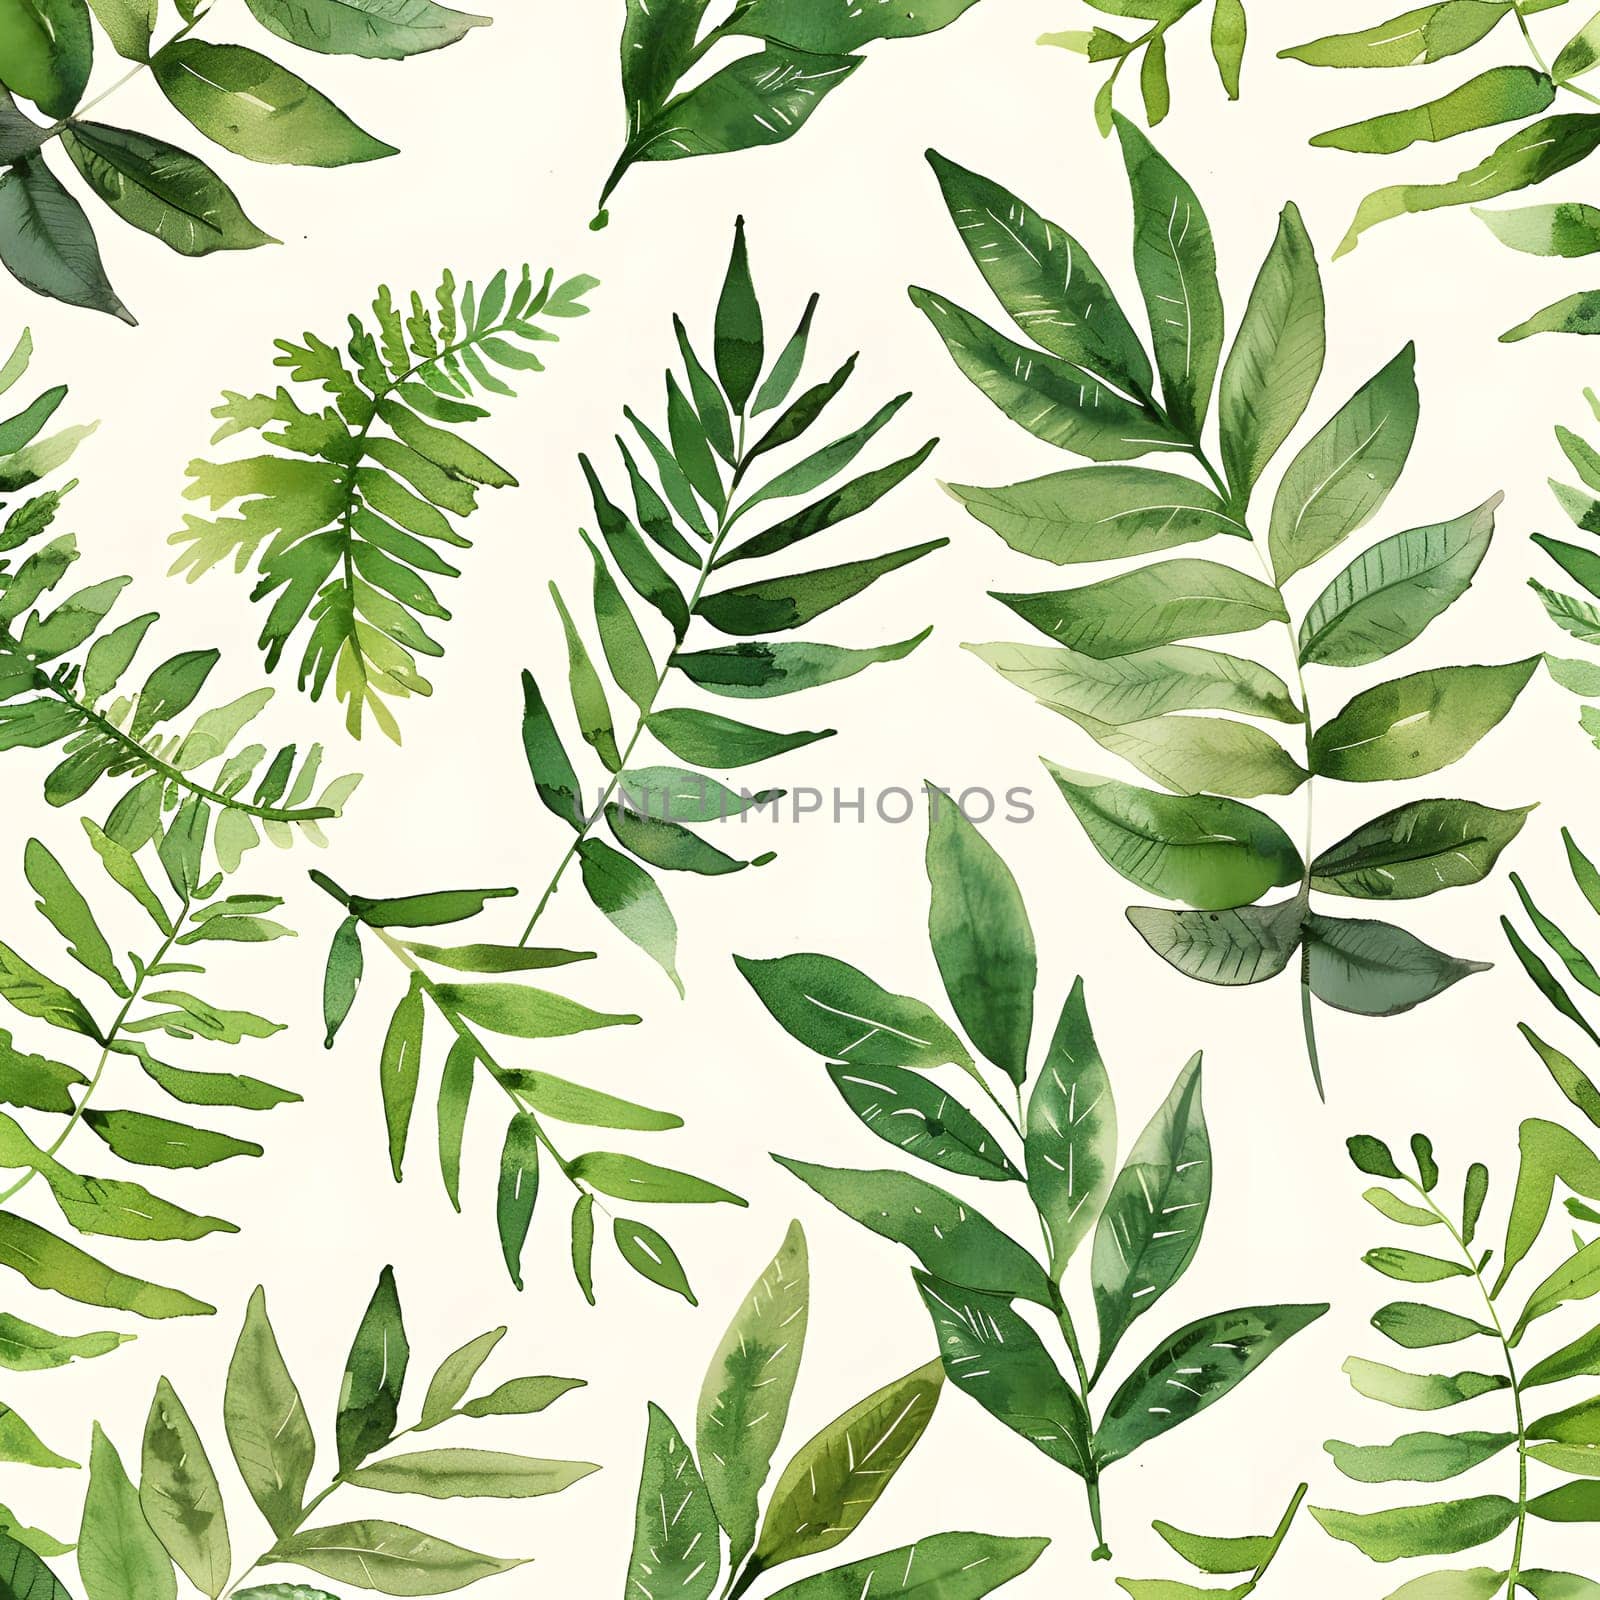 A botanical pattern showcasing a seamless arrangement of green leaves on a white background, symbolizing the beauty and complexity of terrestrial plant organisms in nature